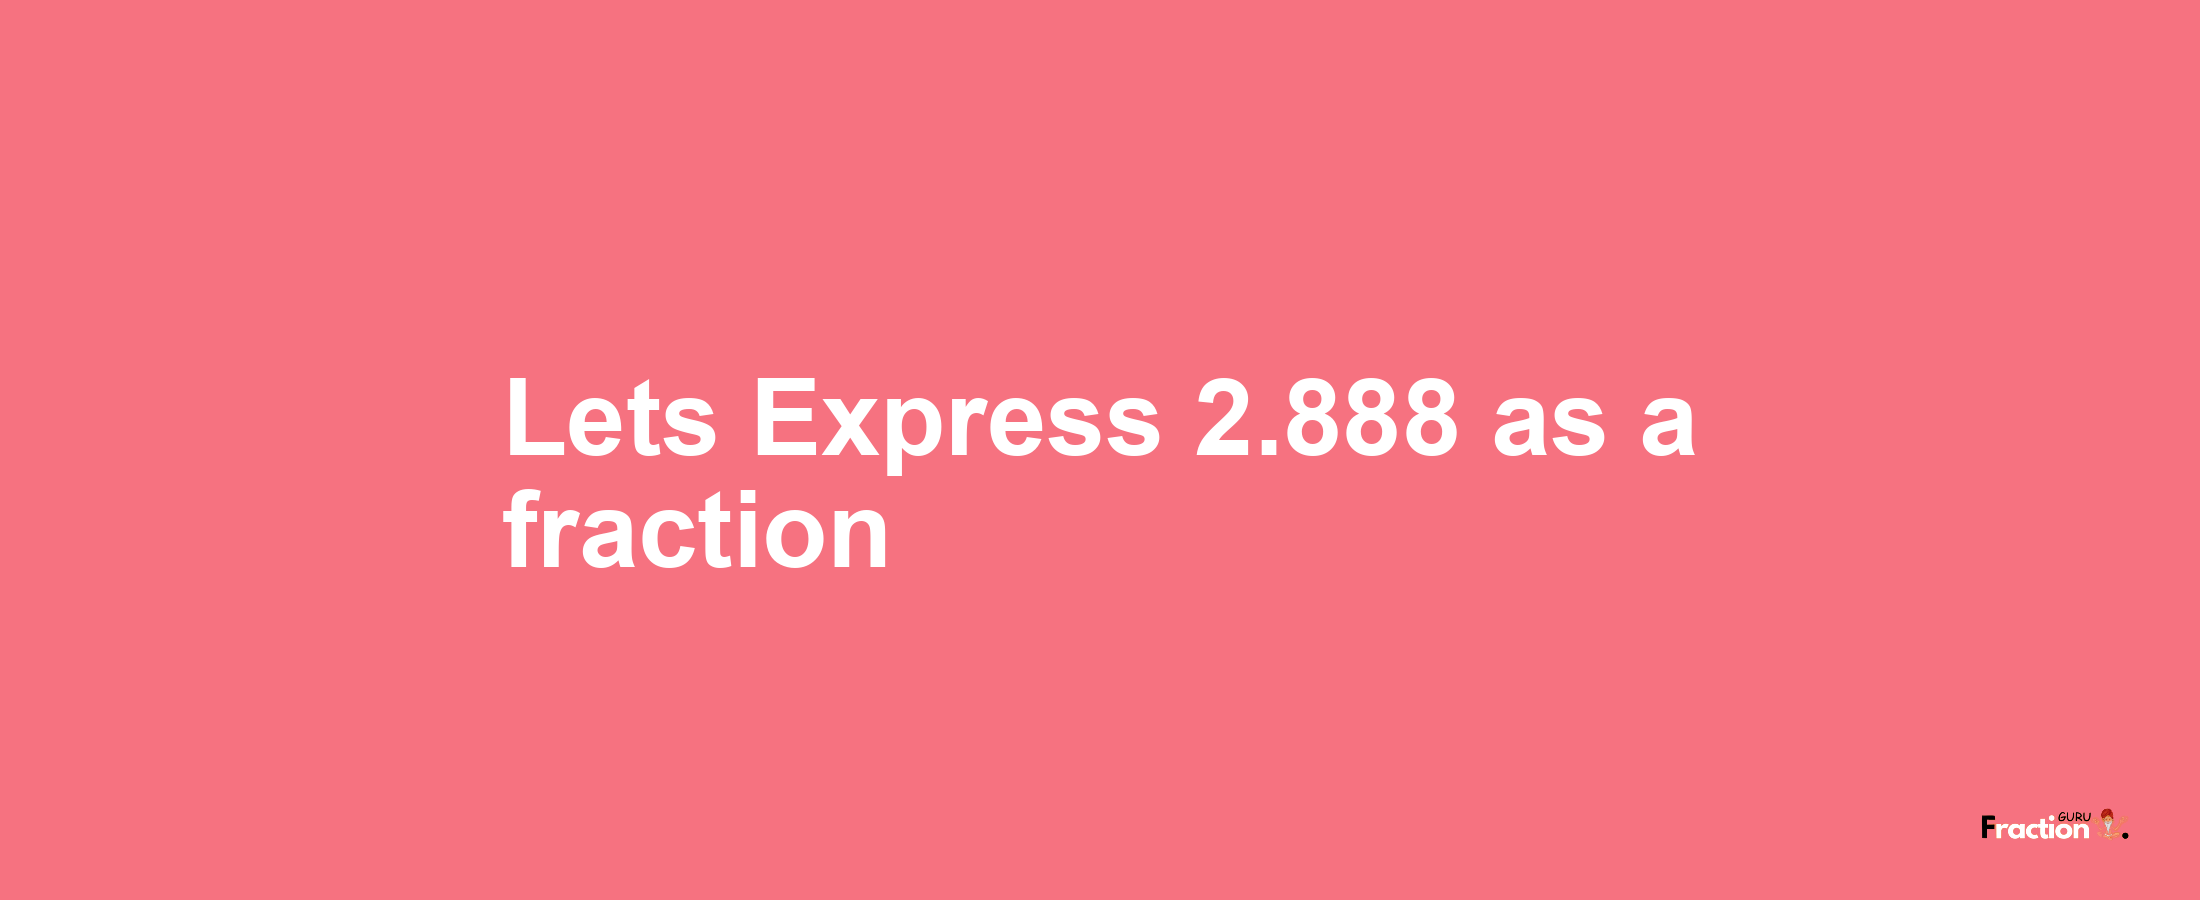 Lets Express 2.888 as afraction